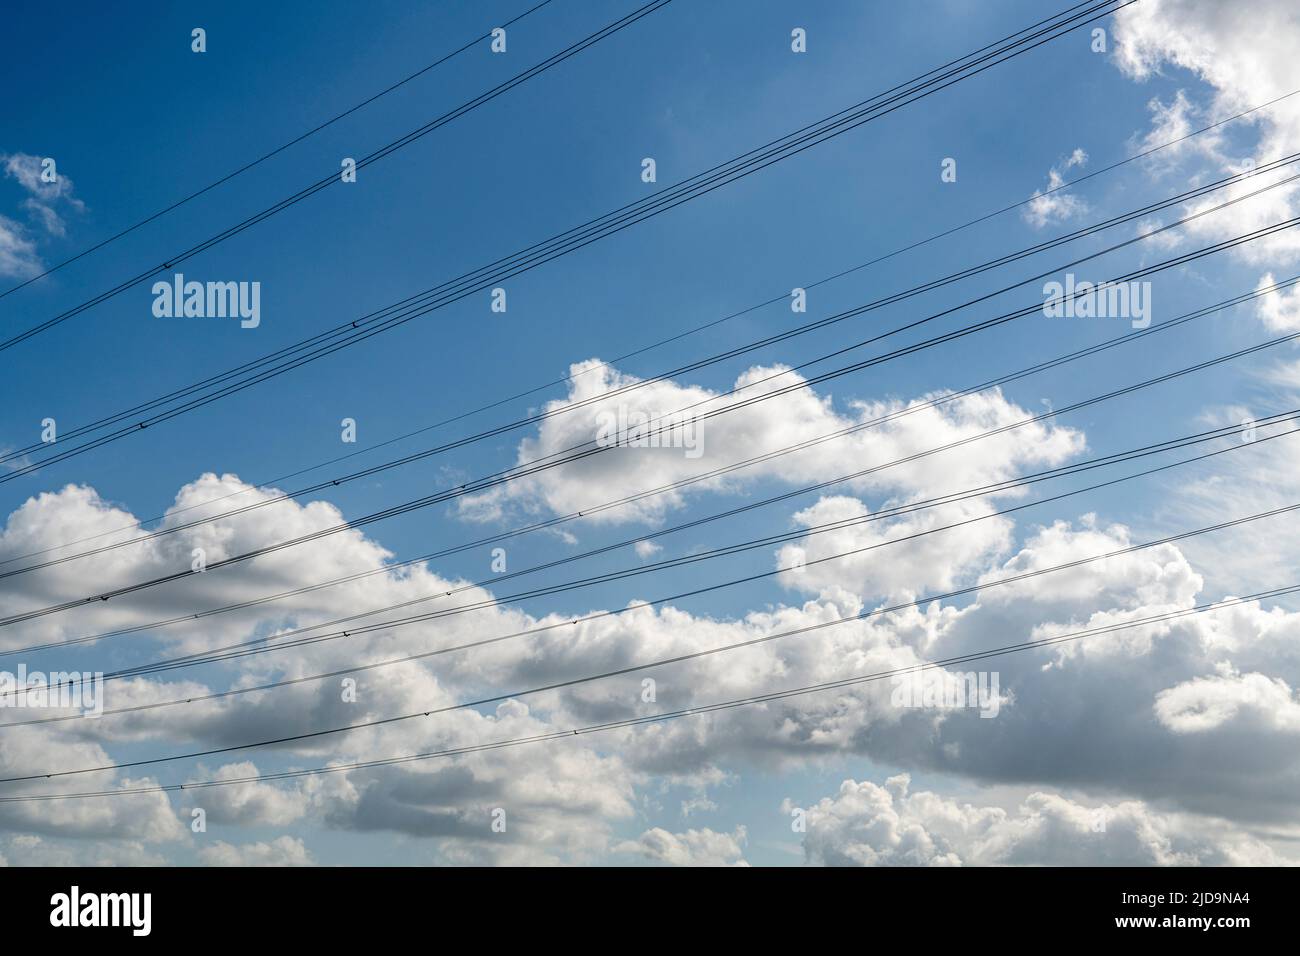 Power lines against a sky Stock Photo